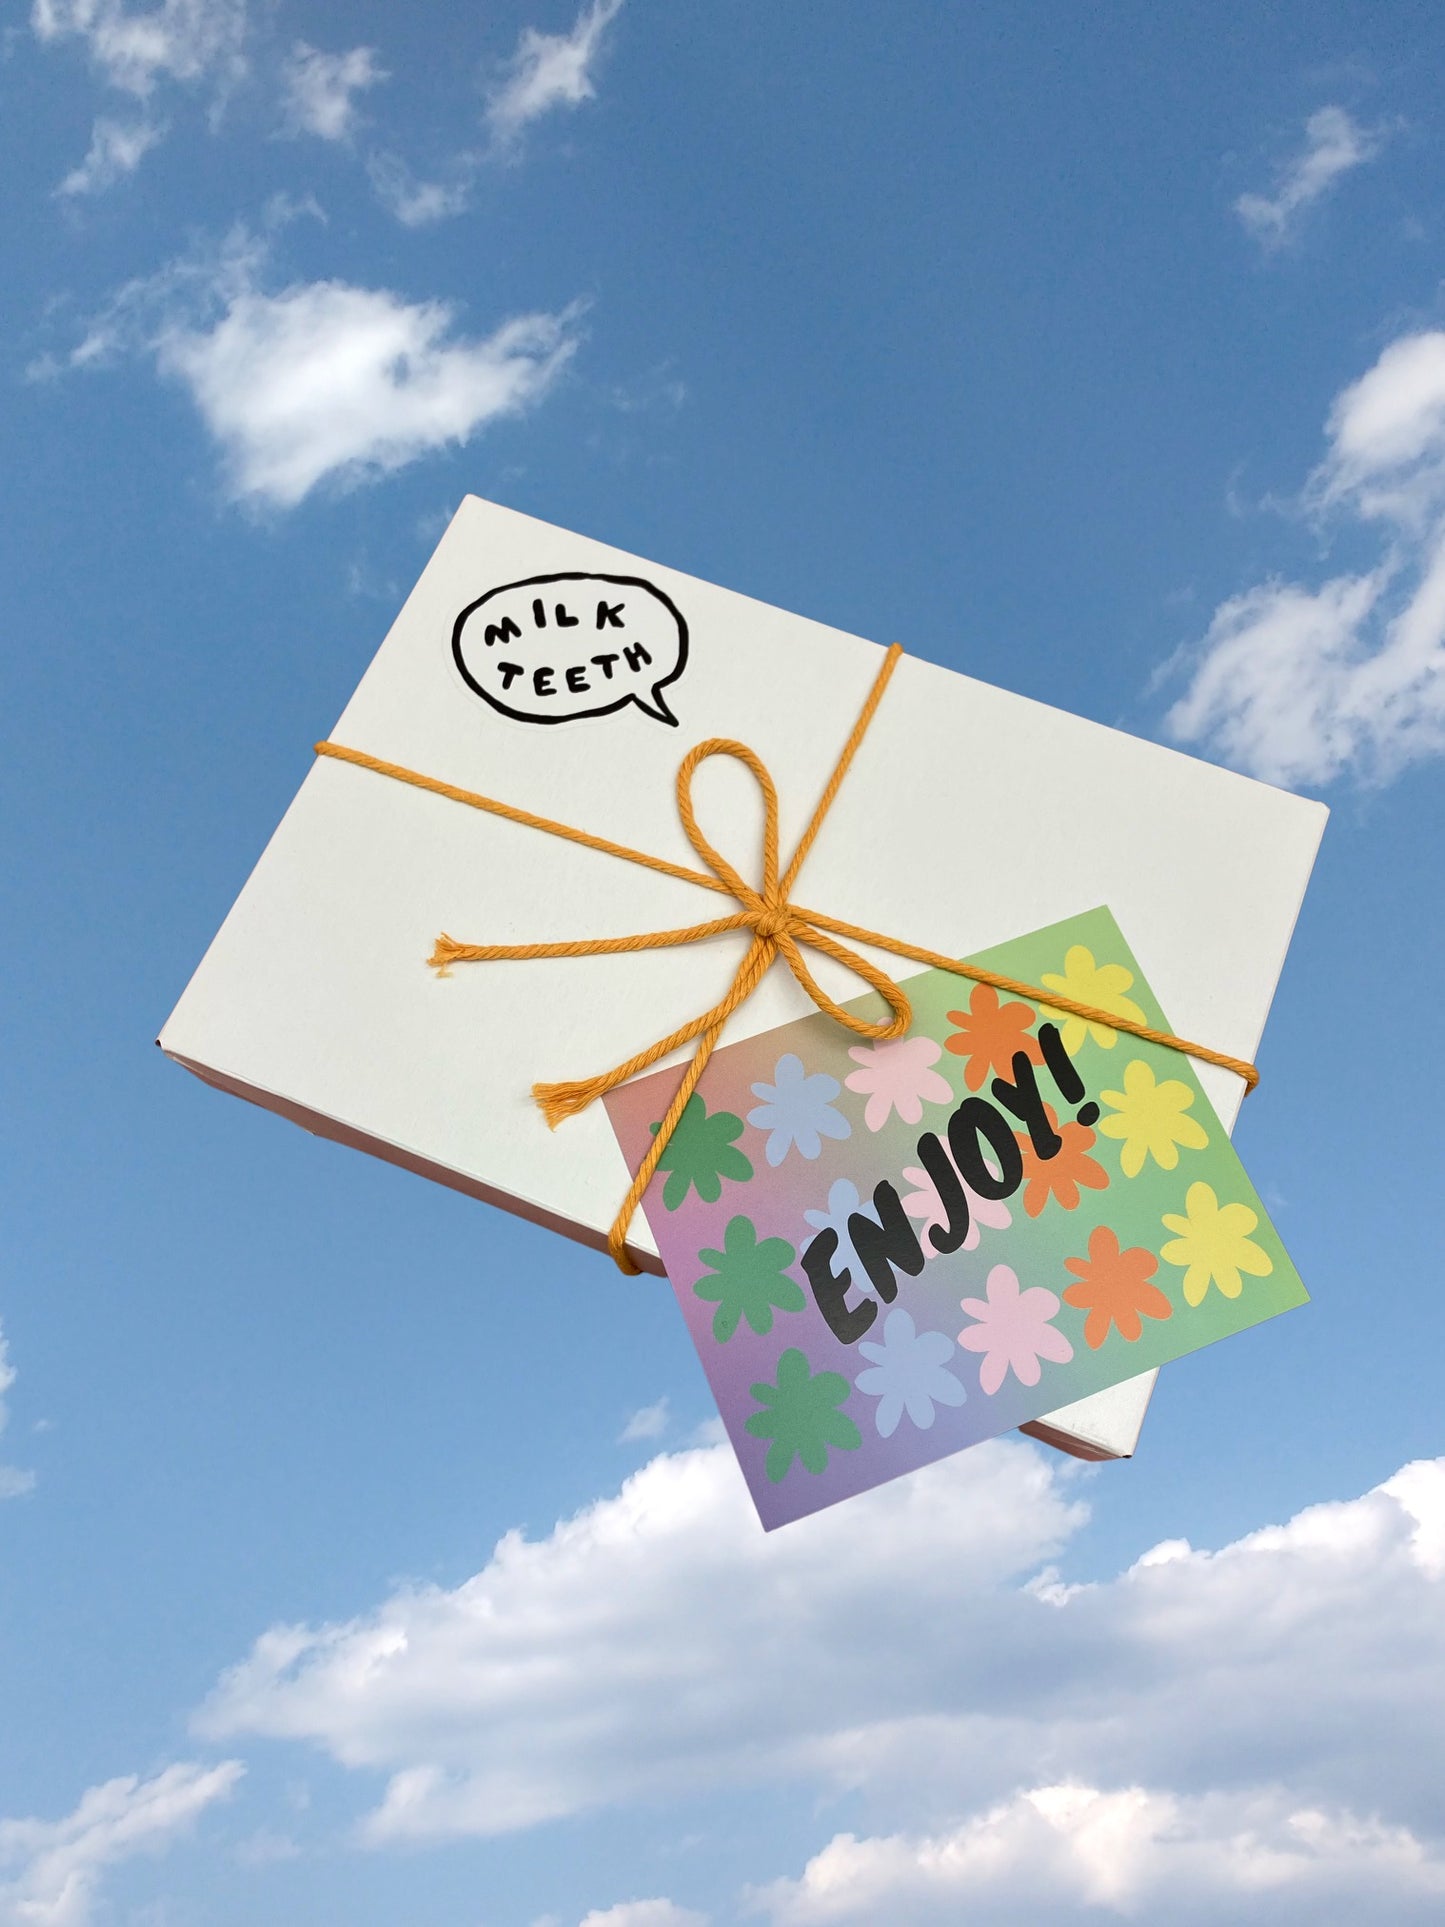 A gift box with yellow twine and Milk Teeth logo shown against a blue sky, with multicolored floral card